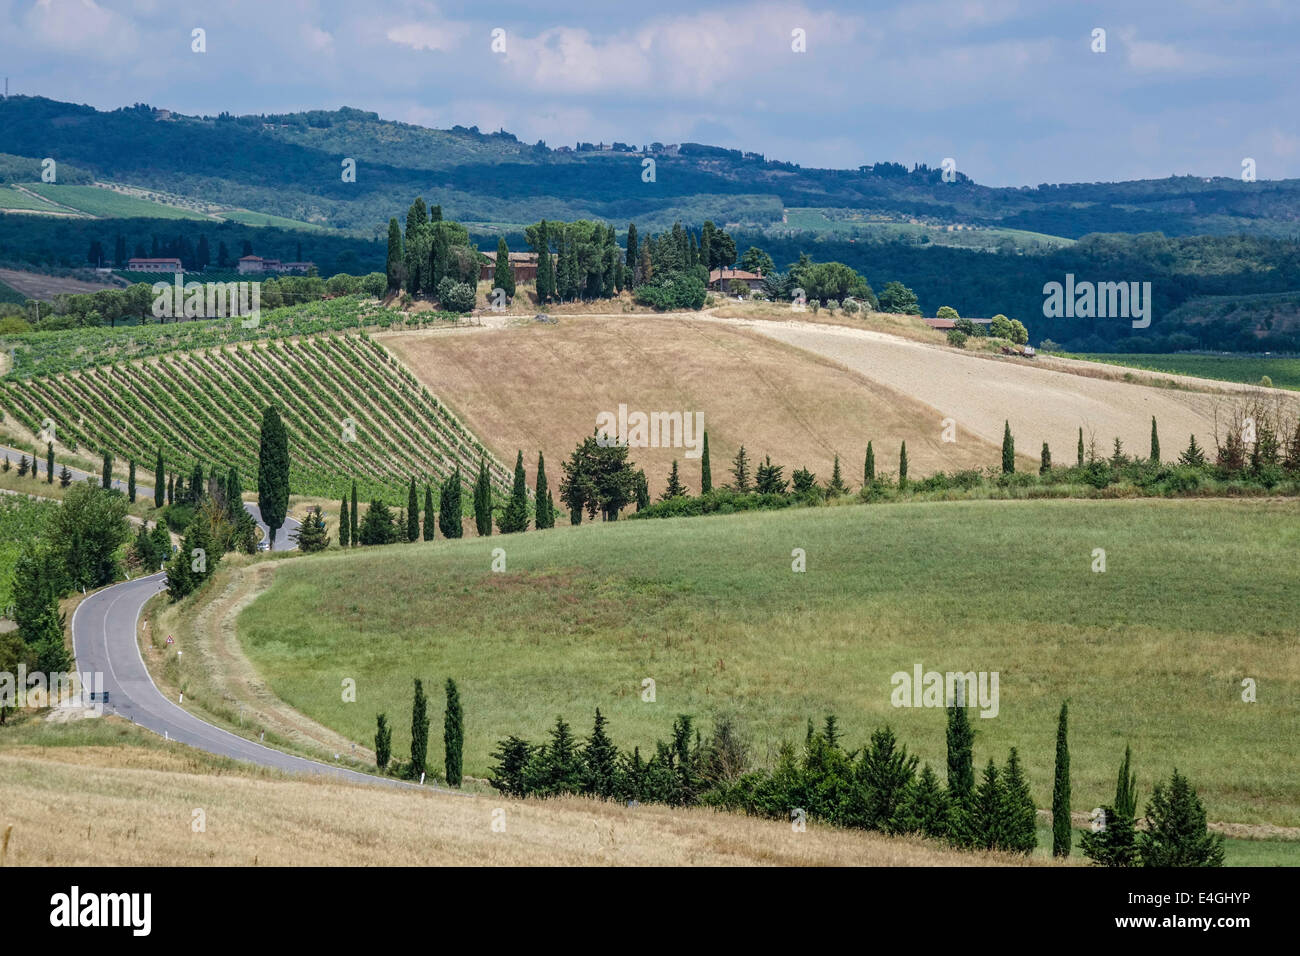 Typical landscape with vineyards in Tuscany, Italy, Europe Stock Photo